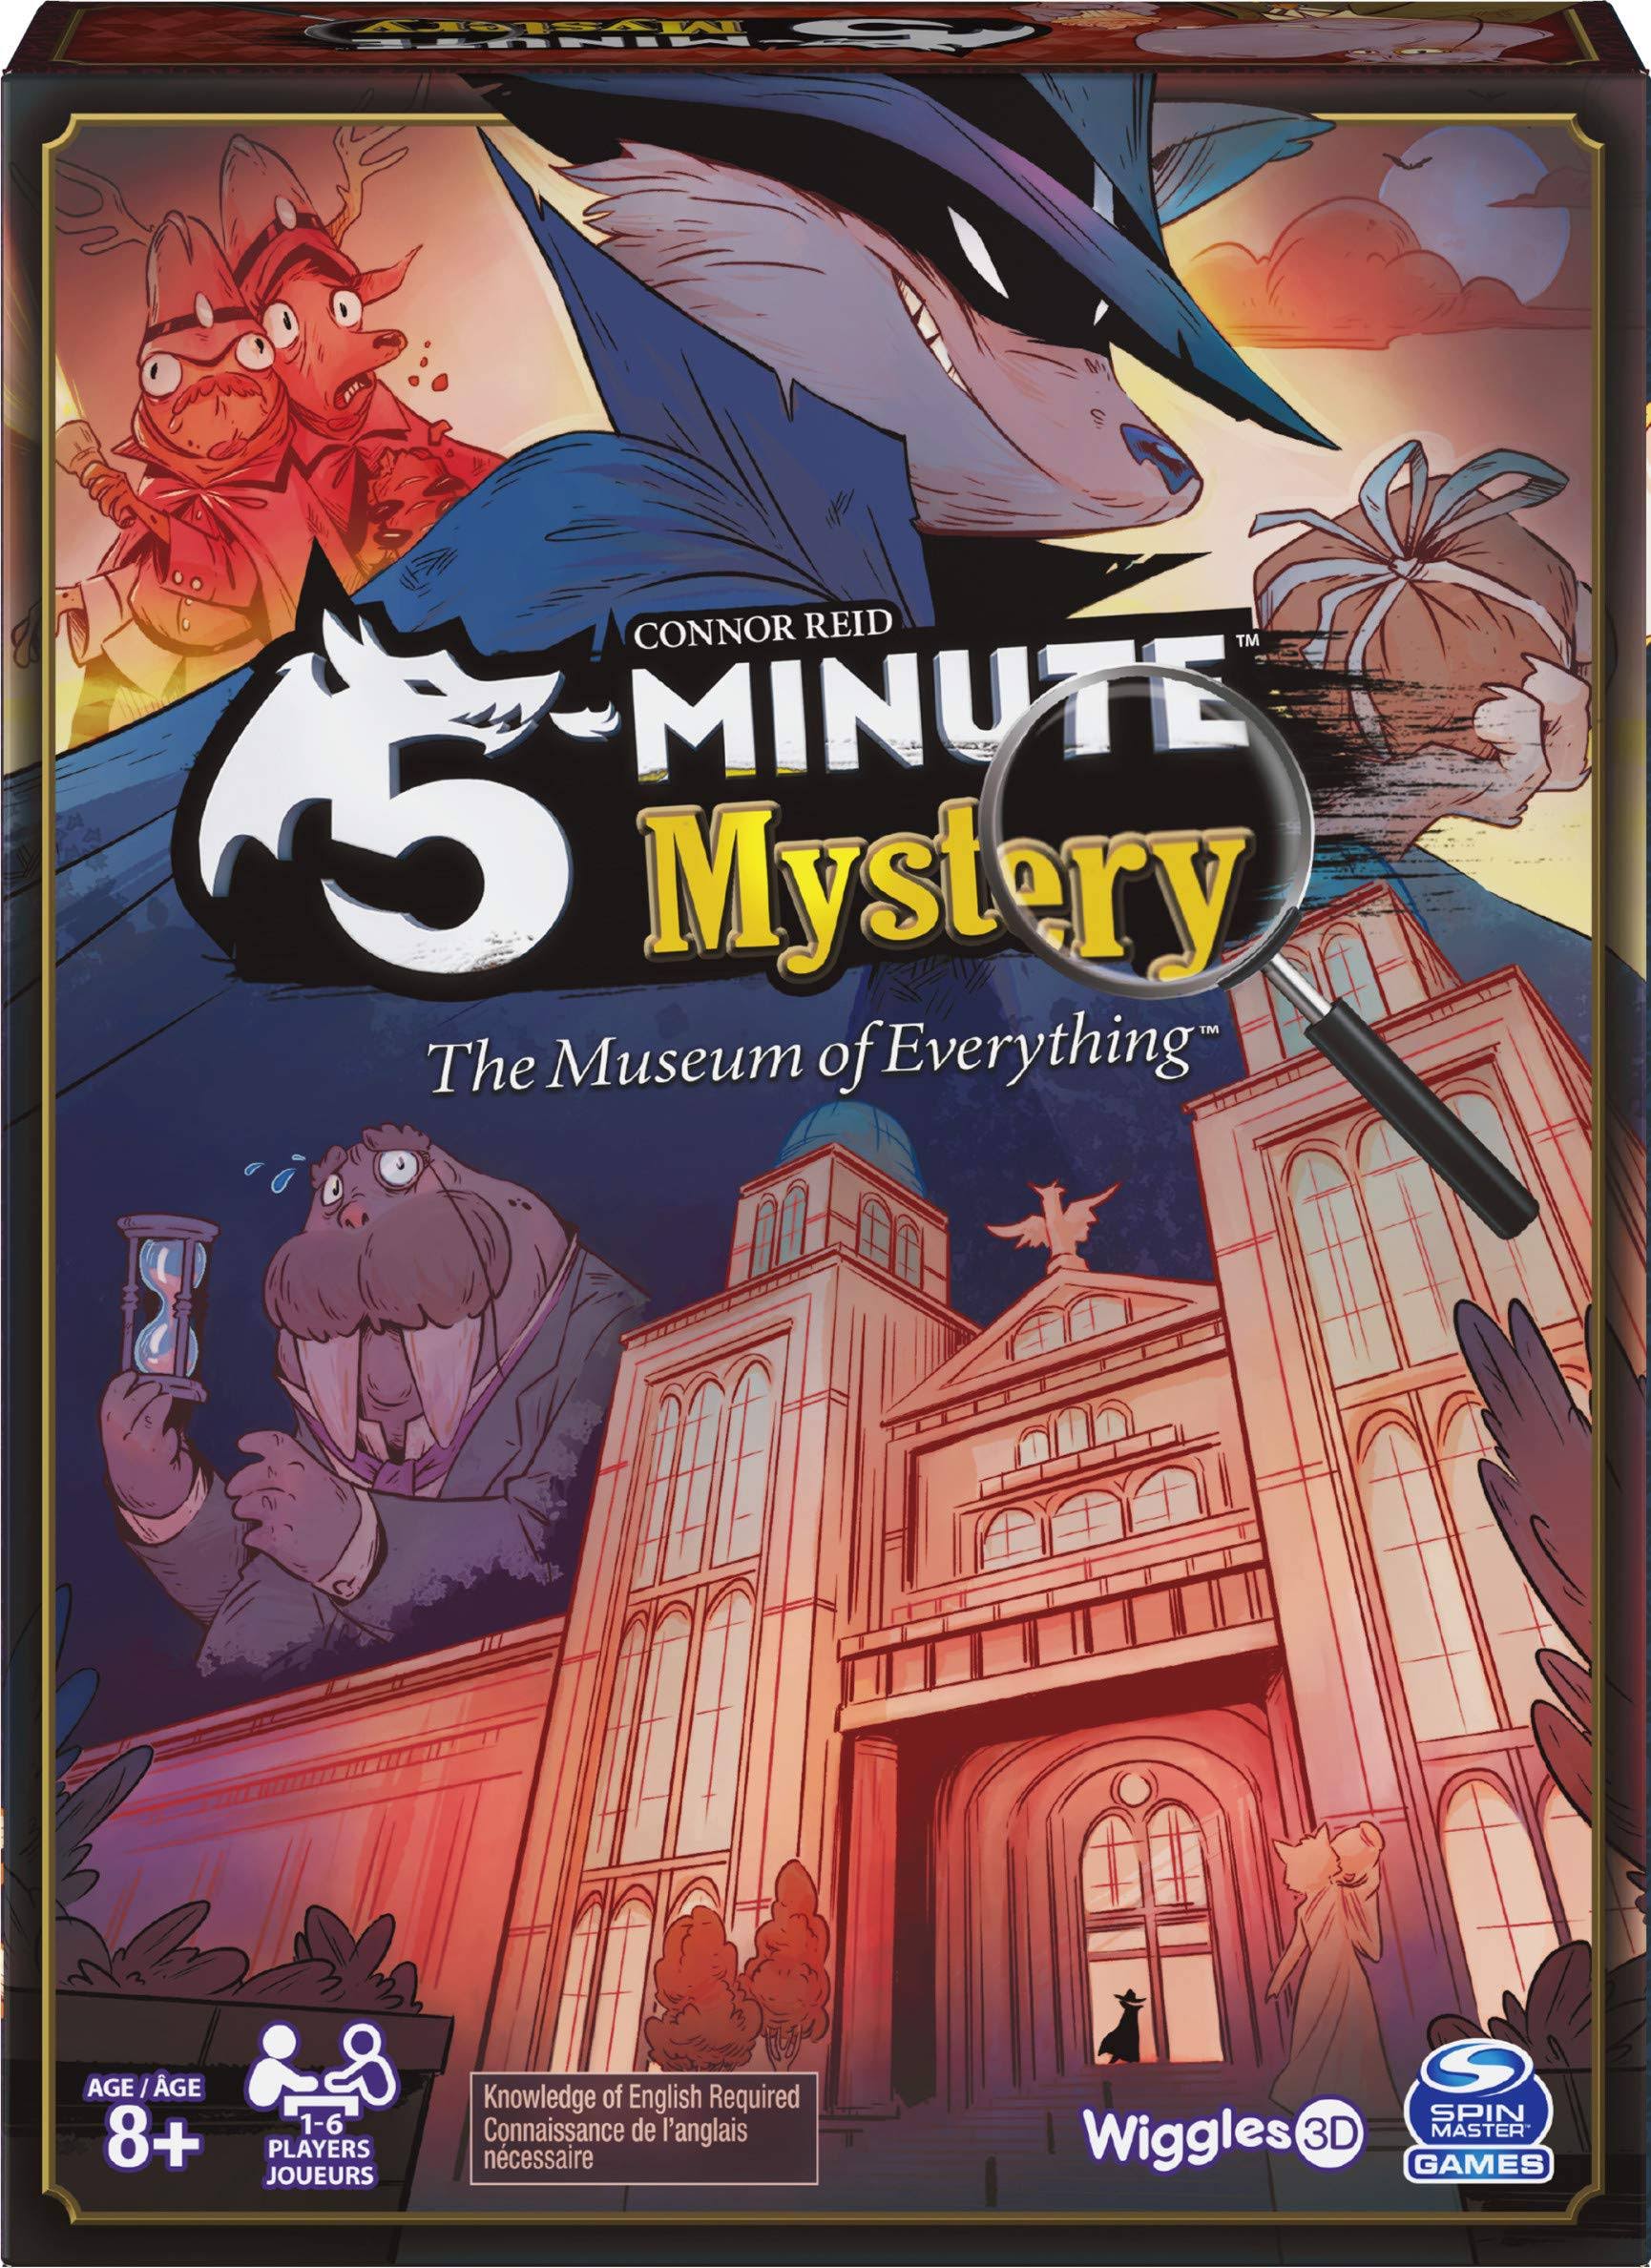 5-Minute Mystery The Museum of Everything Game, for Adults and Kids Ages 8 and Up, by Spinmaster